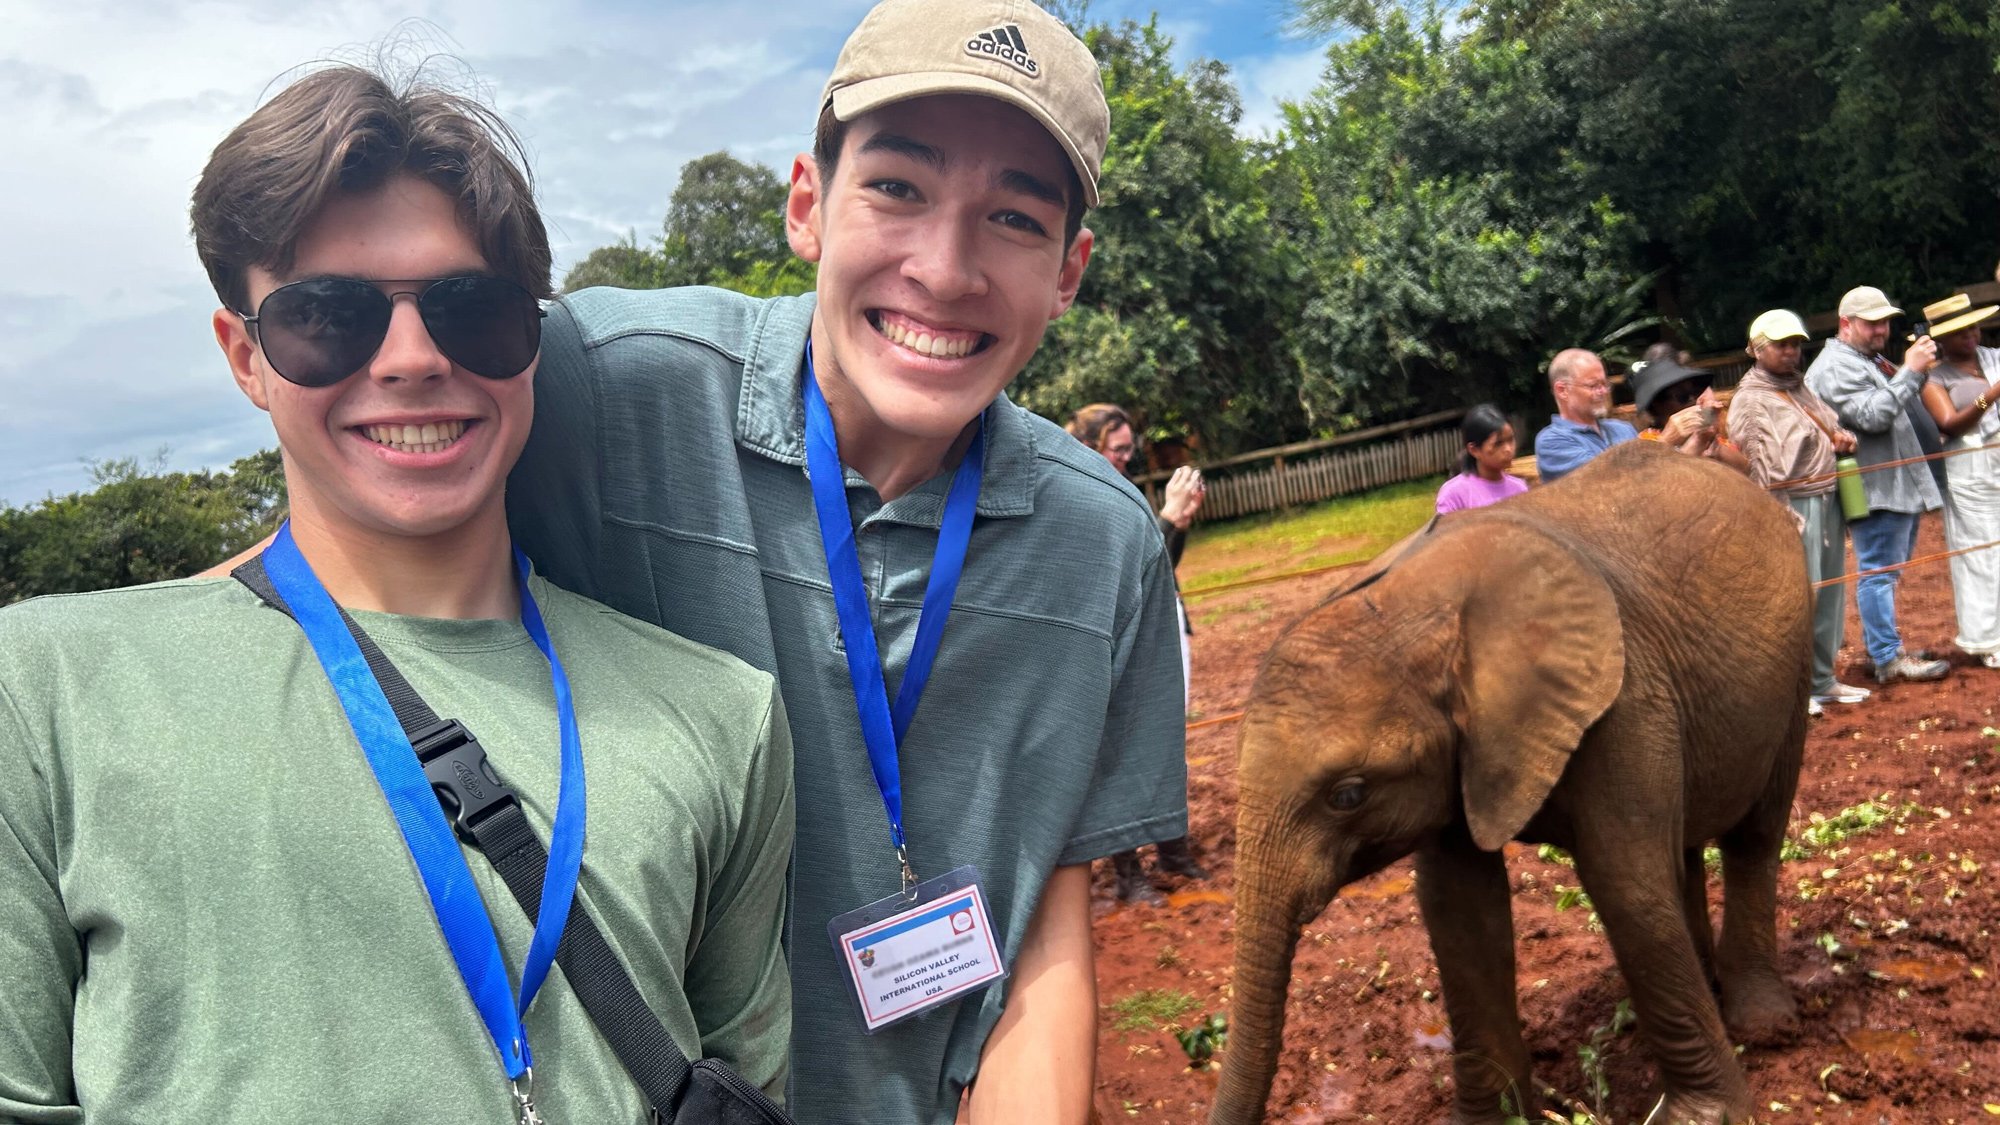 Two INTL juniors posing in front of a baby elephant at the elephant orphanage center.